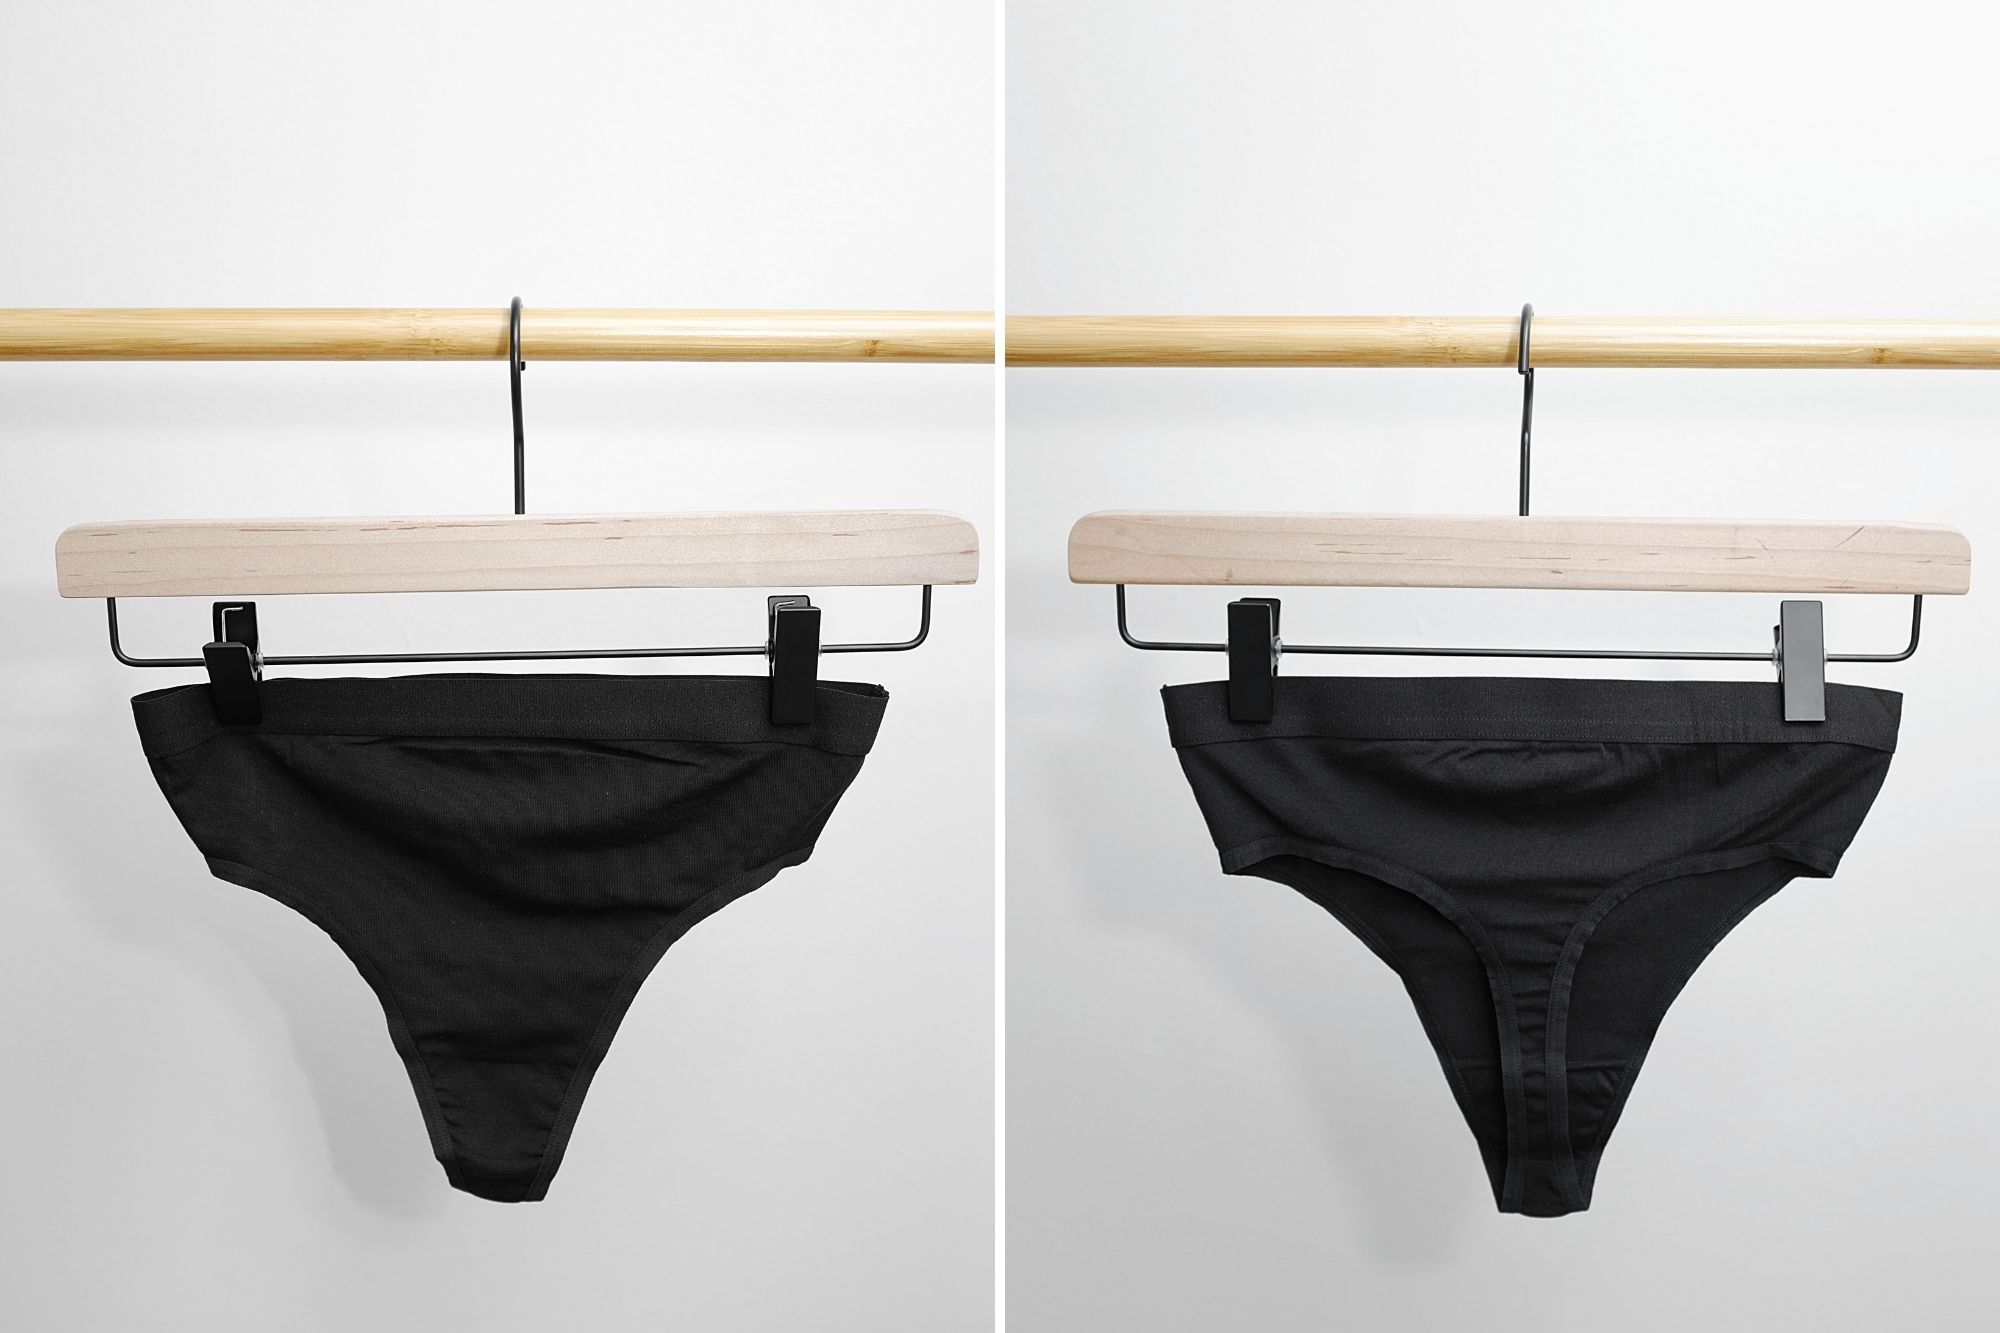 The High Rise Thong hangs on a hanger, front and back